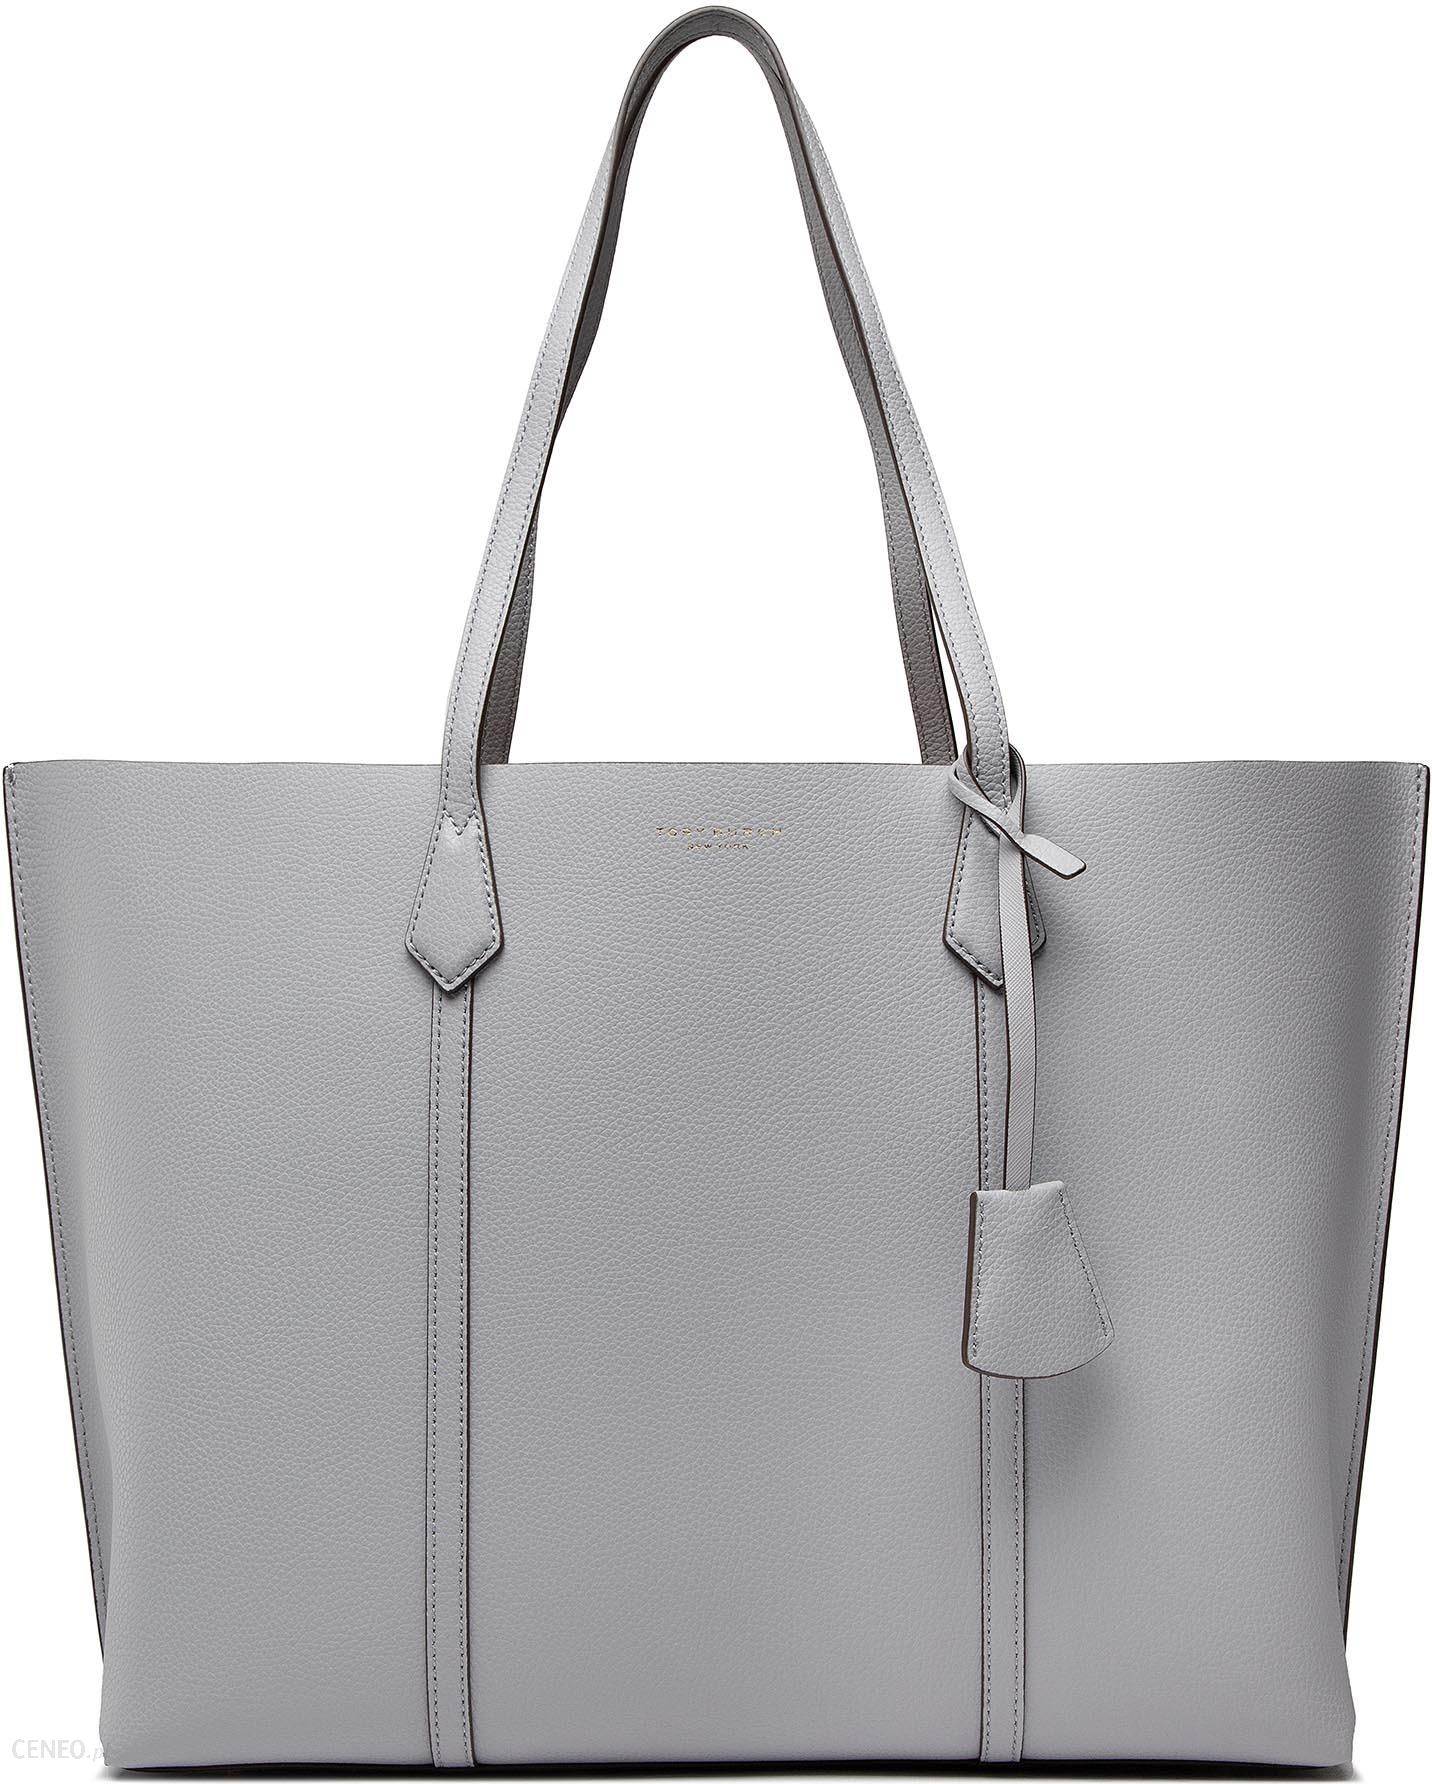 Torebka TORY BURCH - Perry Triple-Compartment Tote 81932 Bay Gray 029 -  Ceny i opinie 